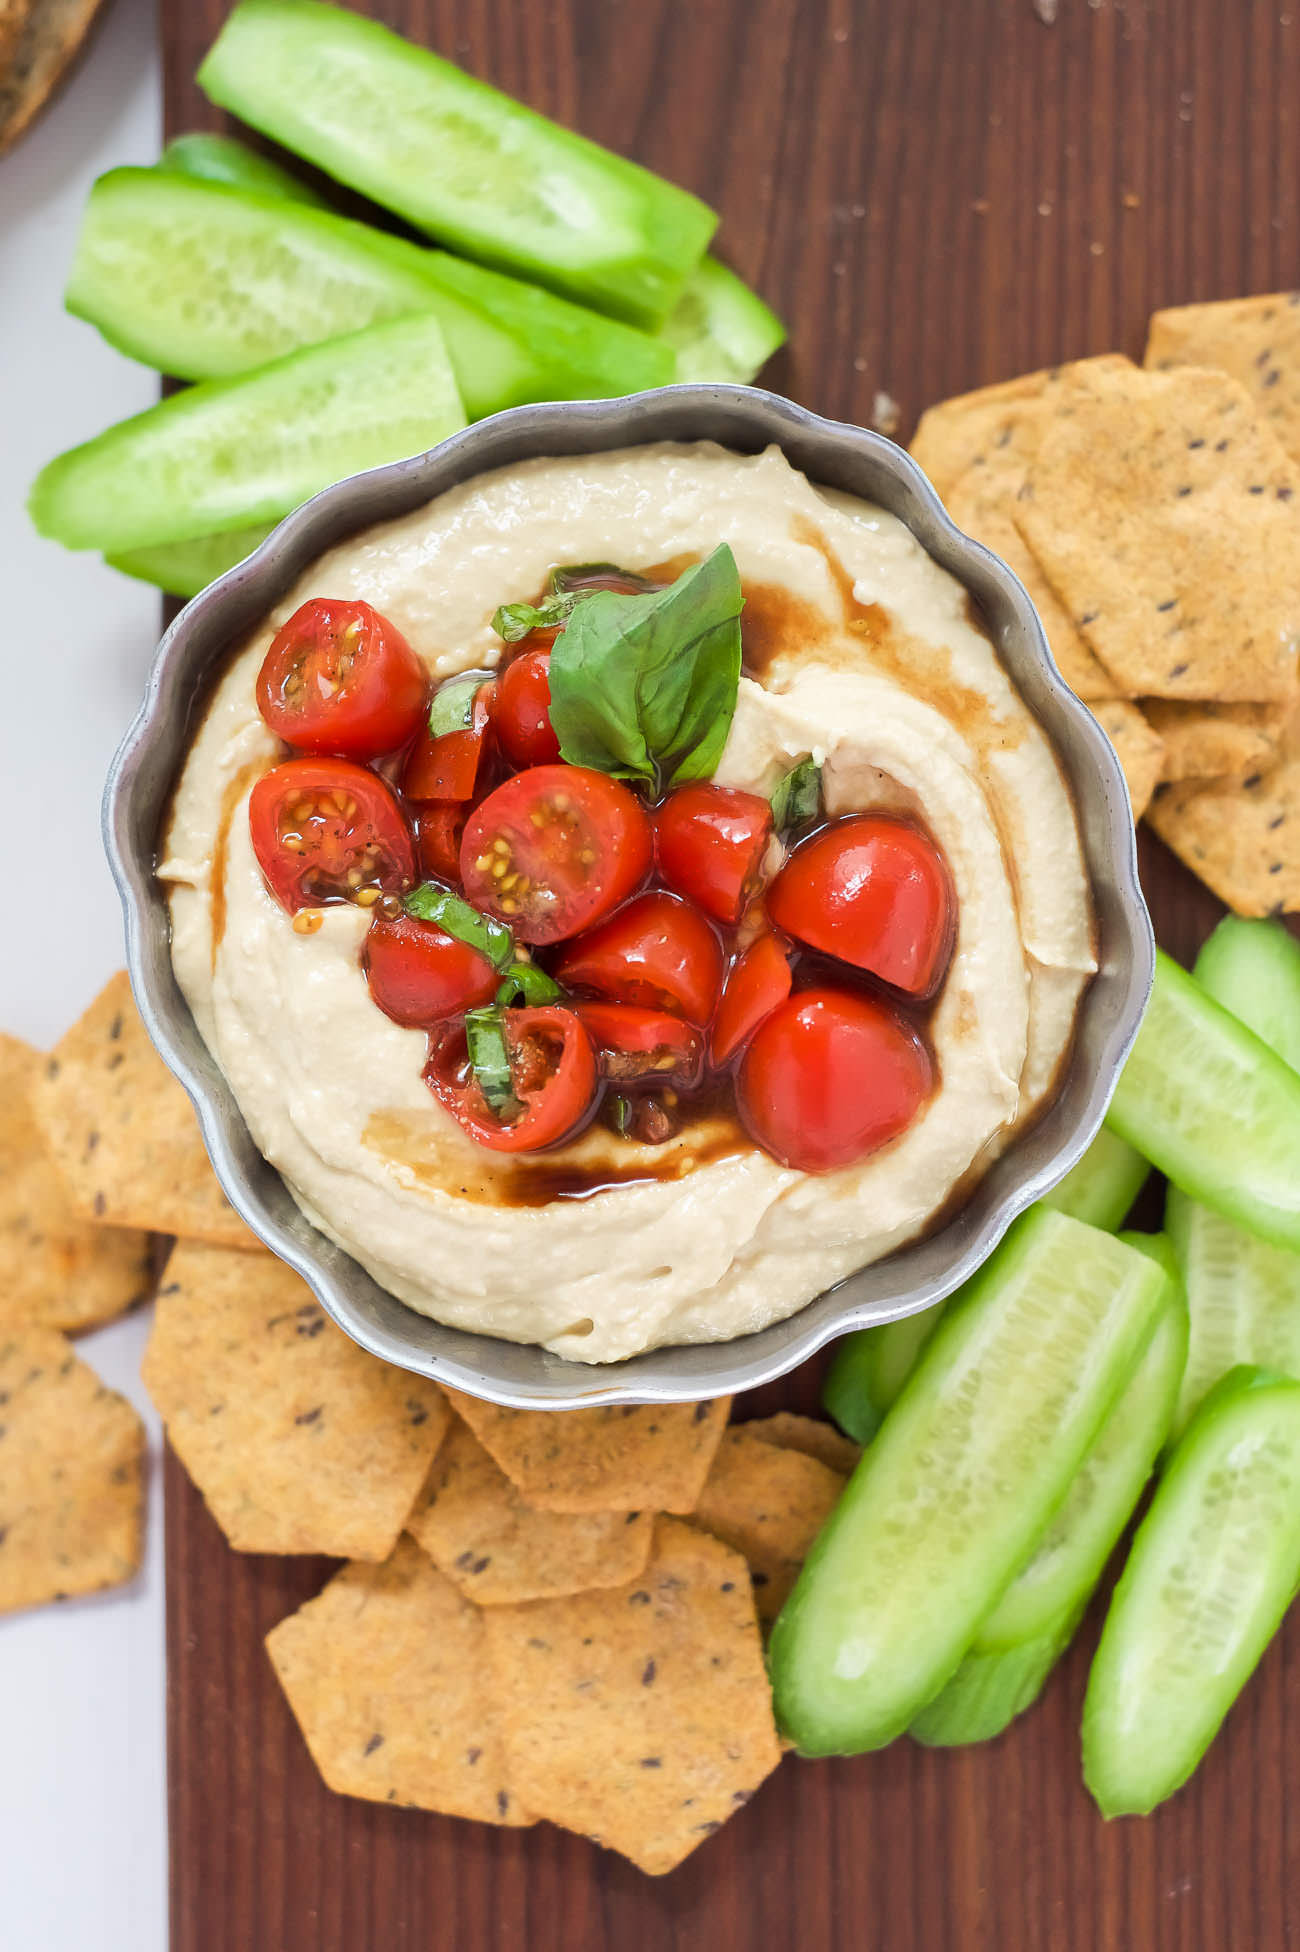 This 5 Minute Bruschetta Hummus is the ideal summer appetizer! The classic Italian flavors shine through with the homemade cherry tomato and garlic bruschetta that pairs perfectly with creamy hummus!